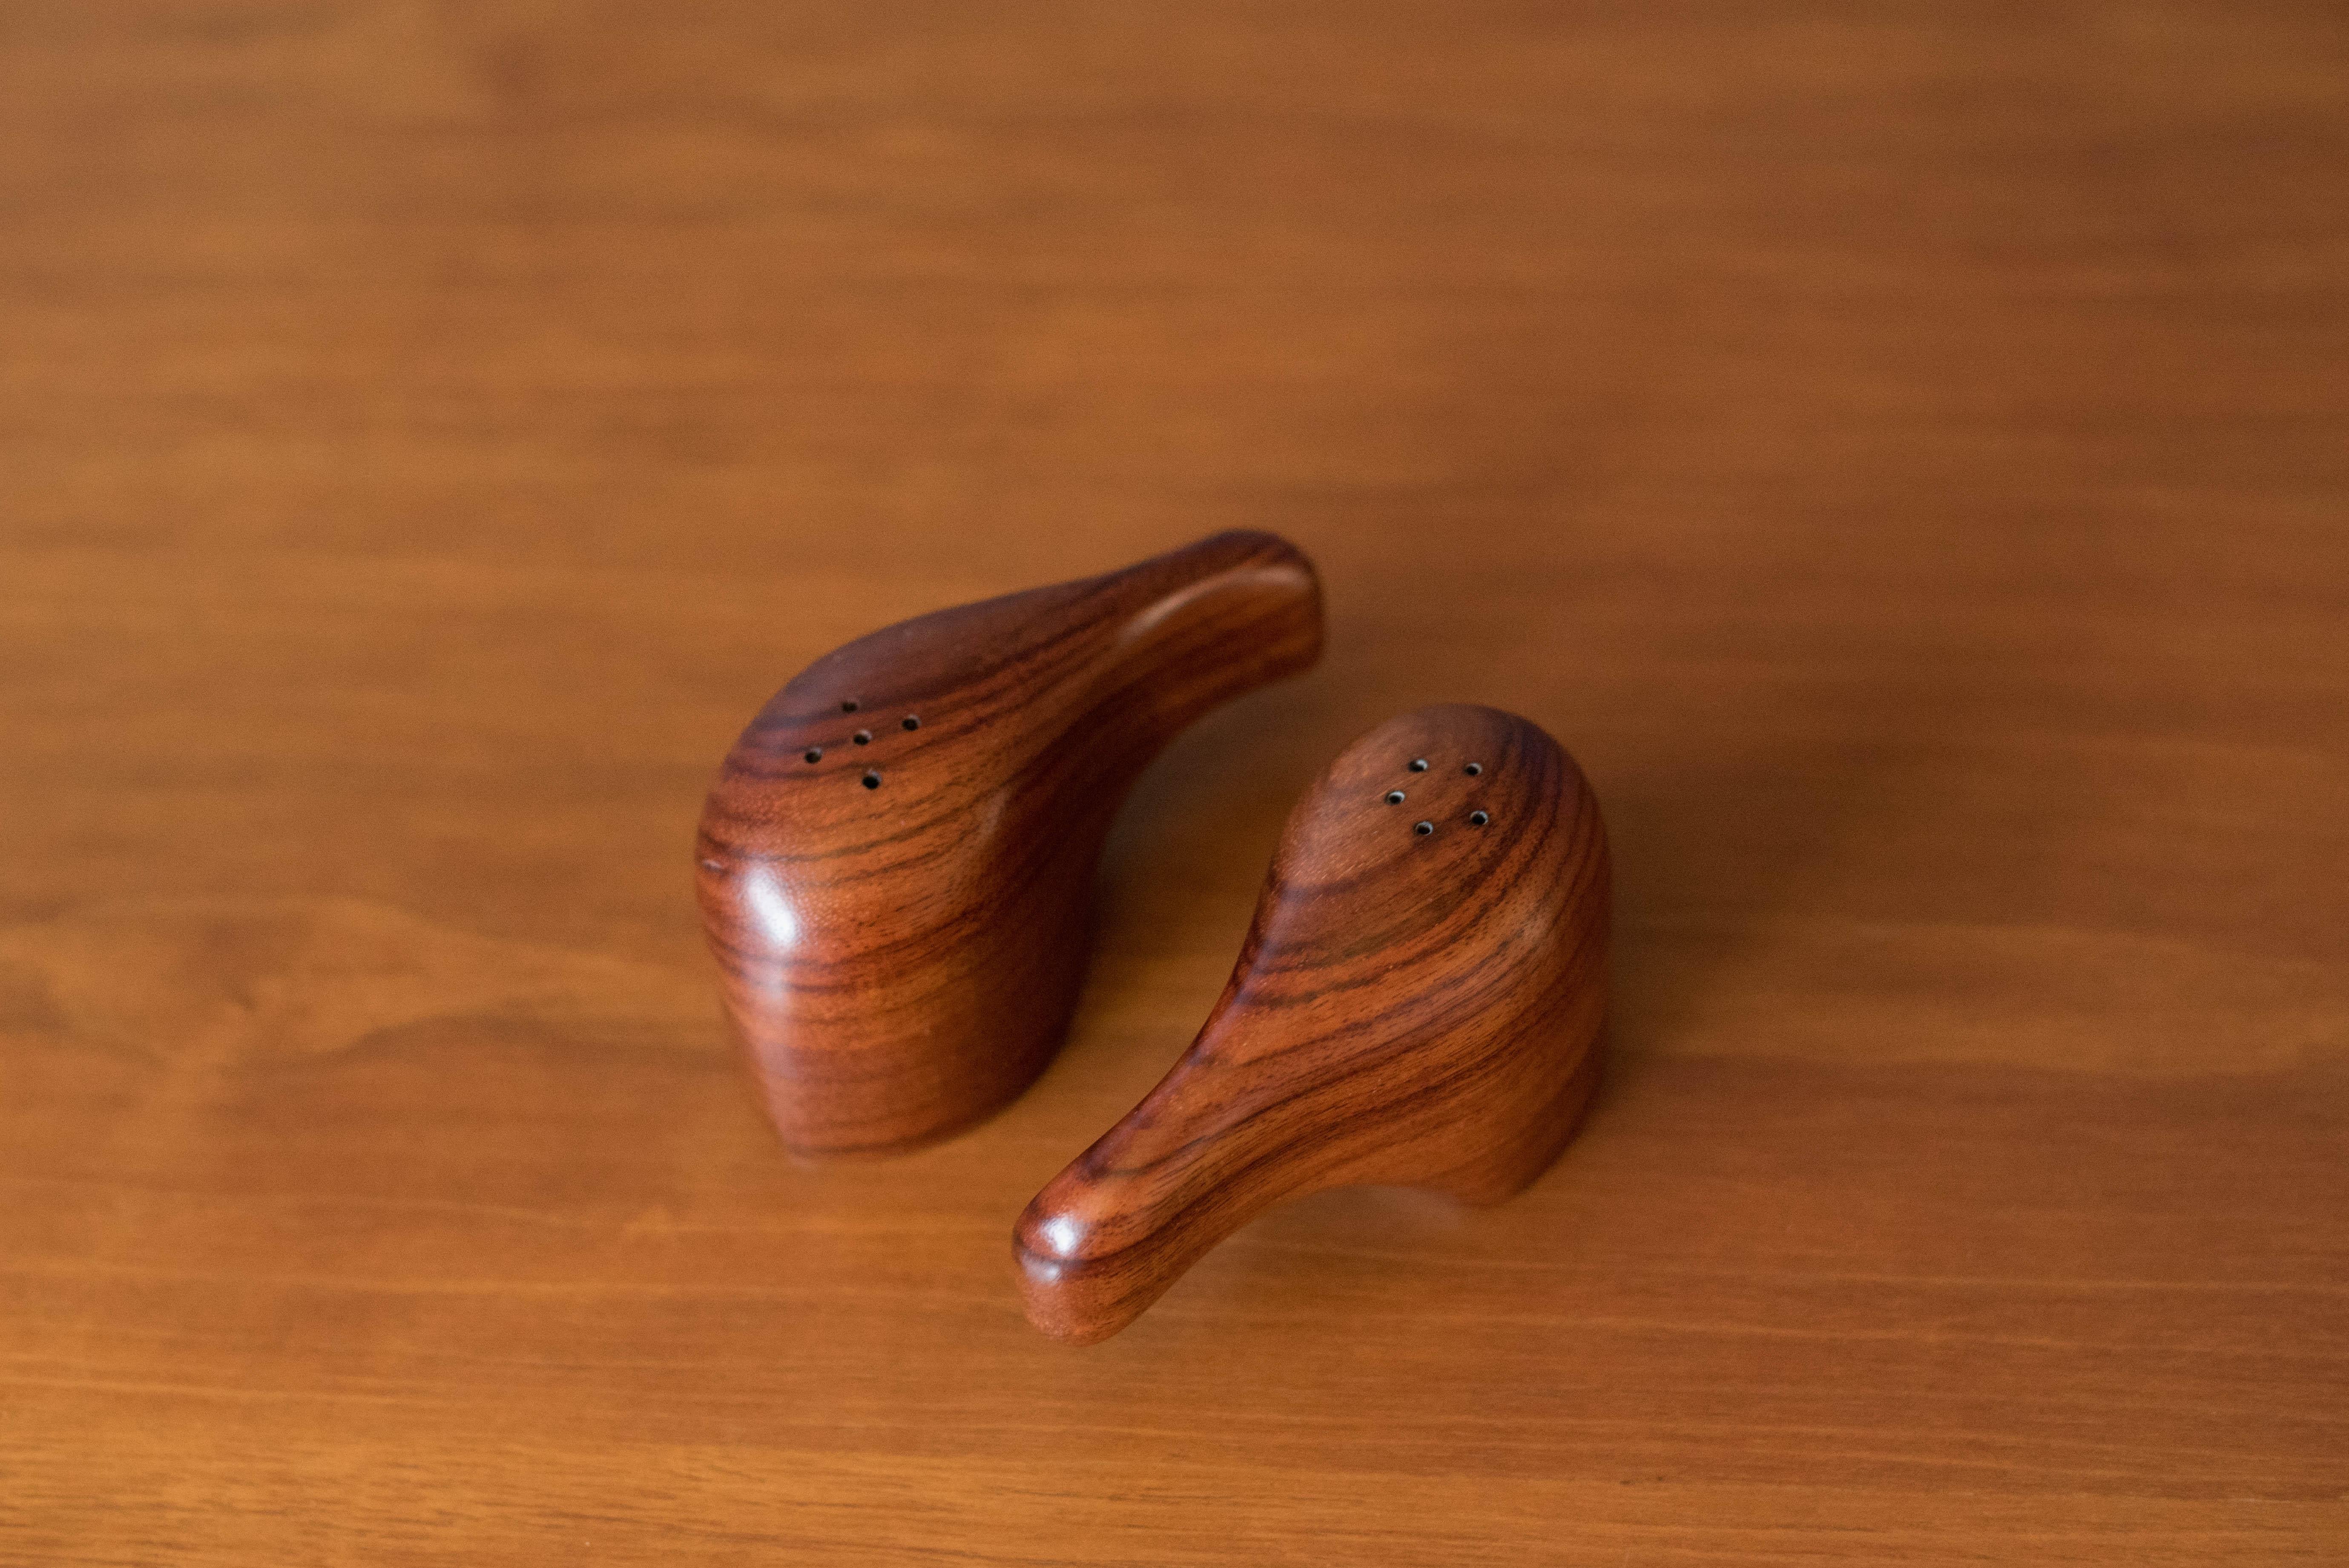 Mid-Century Modern abstract salt and pepper shakers designed by Don Shoemaker for Señal, S.A. Mexico. This set is handmade in an exotic cocobolo wood displaying rich smooth grains for a standout tabletop setting. Price is for the pair.